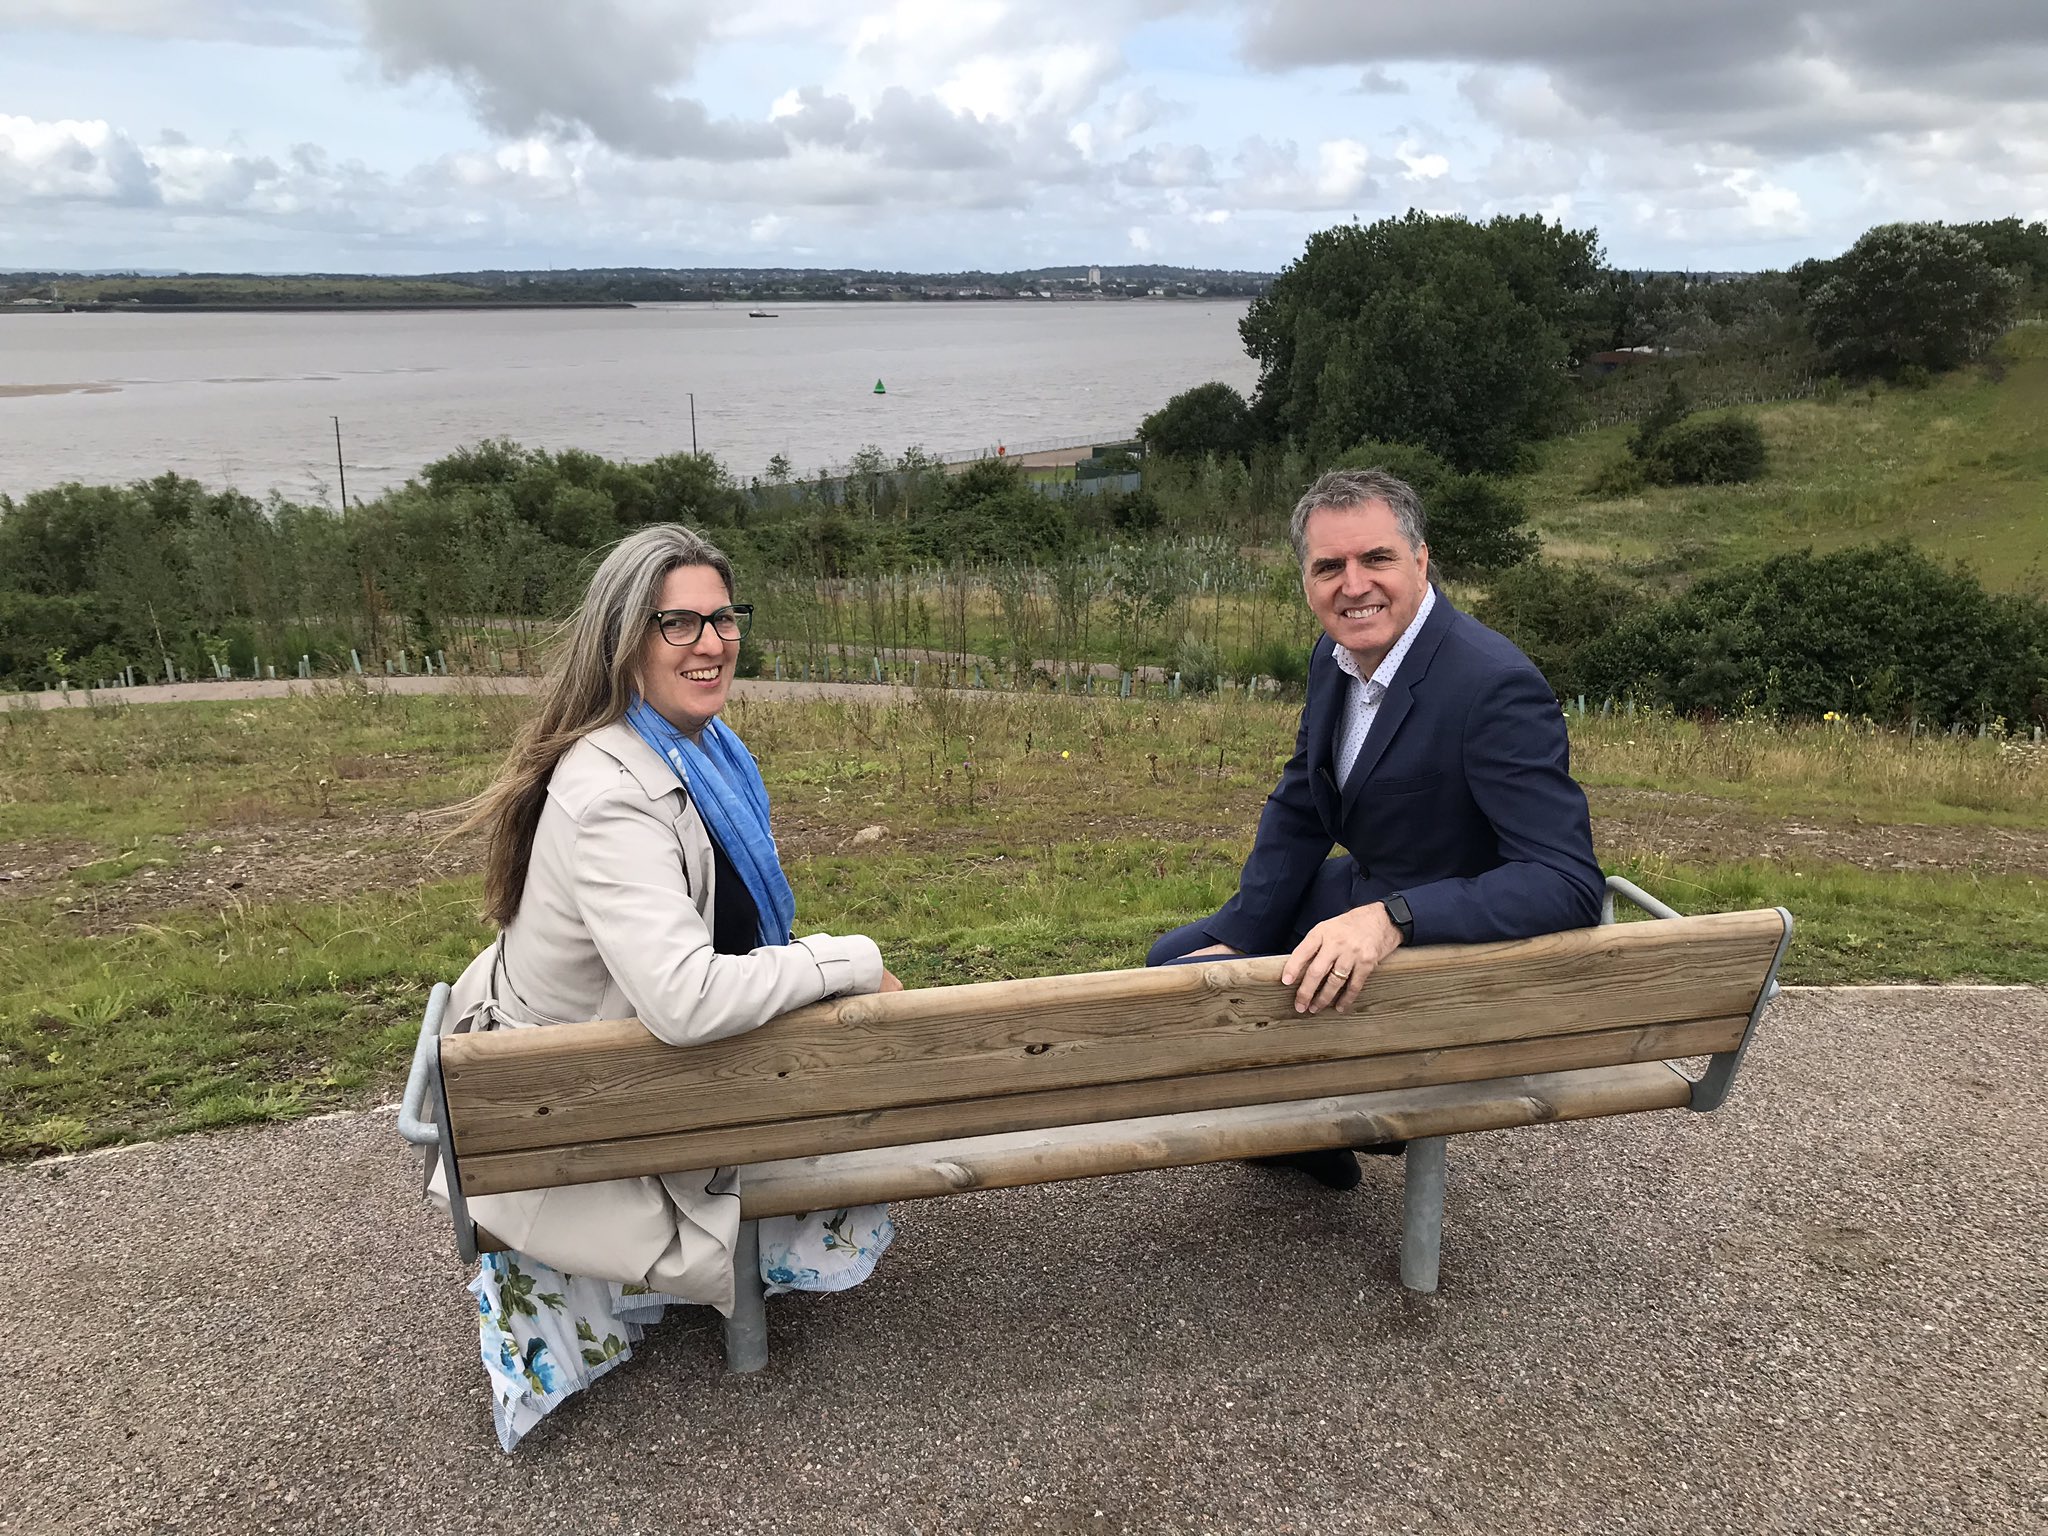 Cllr Laura Robertson-Collins, Liverpool City Council’s Cabinet Member for Neighbourhoods and Mayor of Liverpool City Region, Steve Rotheram, officially opened Southern Grasslands, next to the Festival Gardens Park, today.